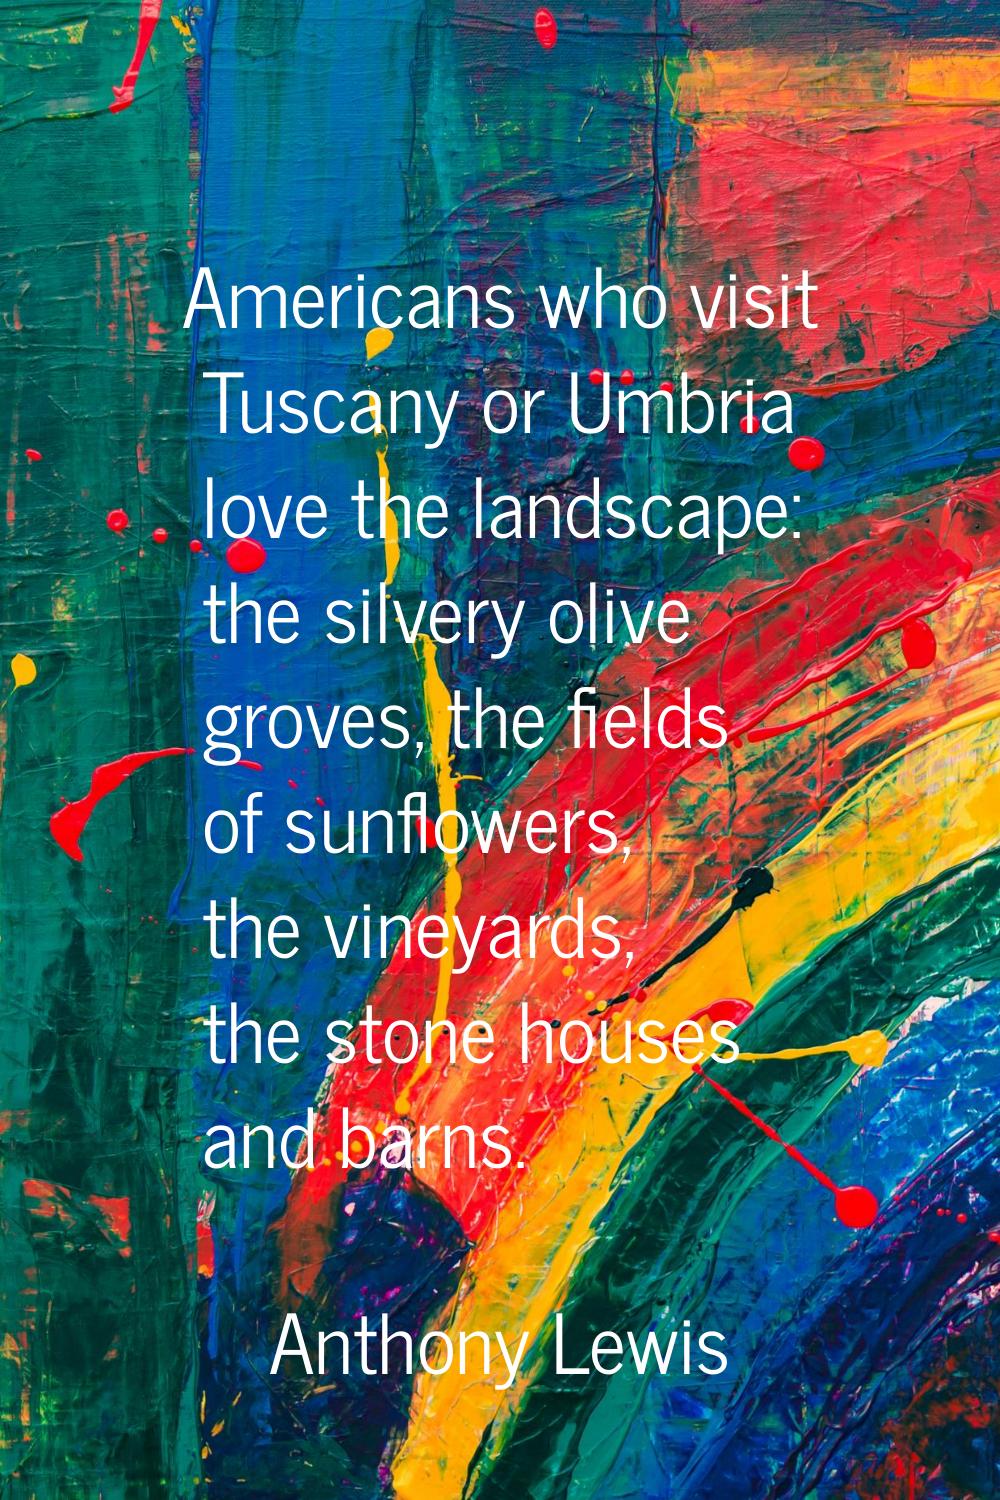 Americans who visit Tuscany or Umbria love the landscape: the silvery olive groves, the fields of s